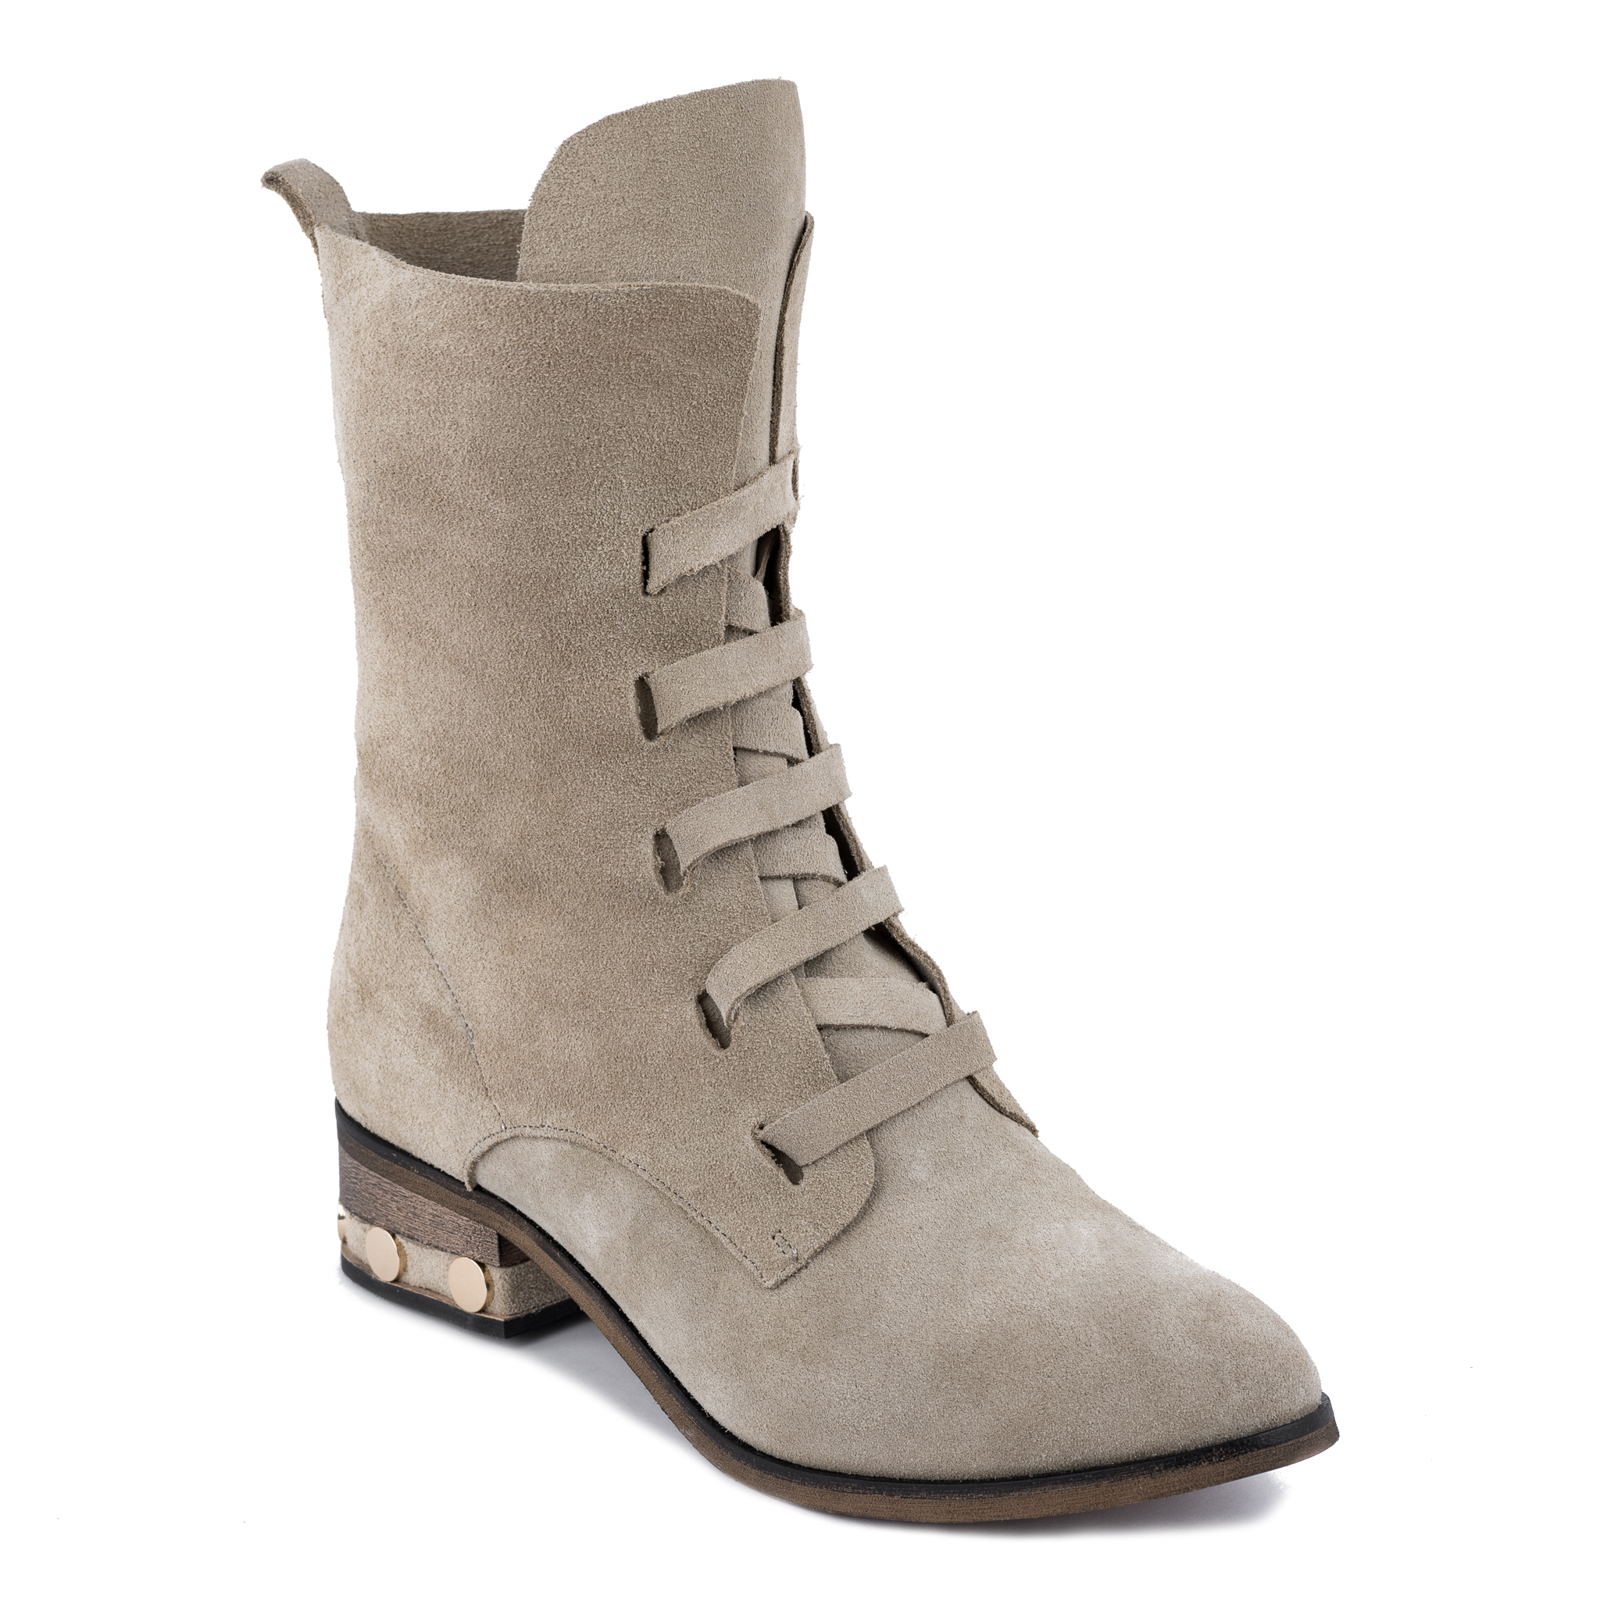 LACE UP LEATHER ANKLE BOOTS WITH RIVETS - BEIGE